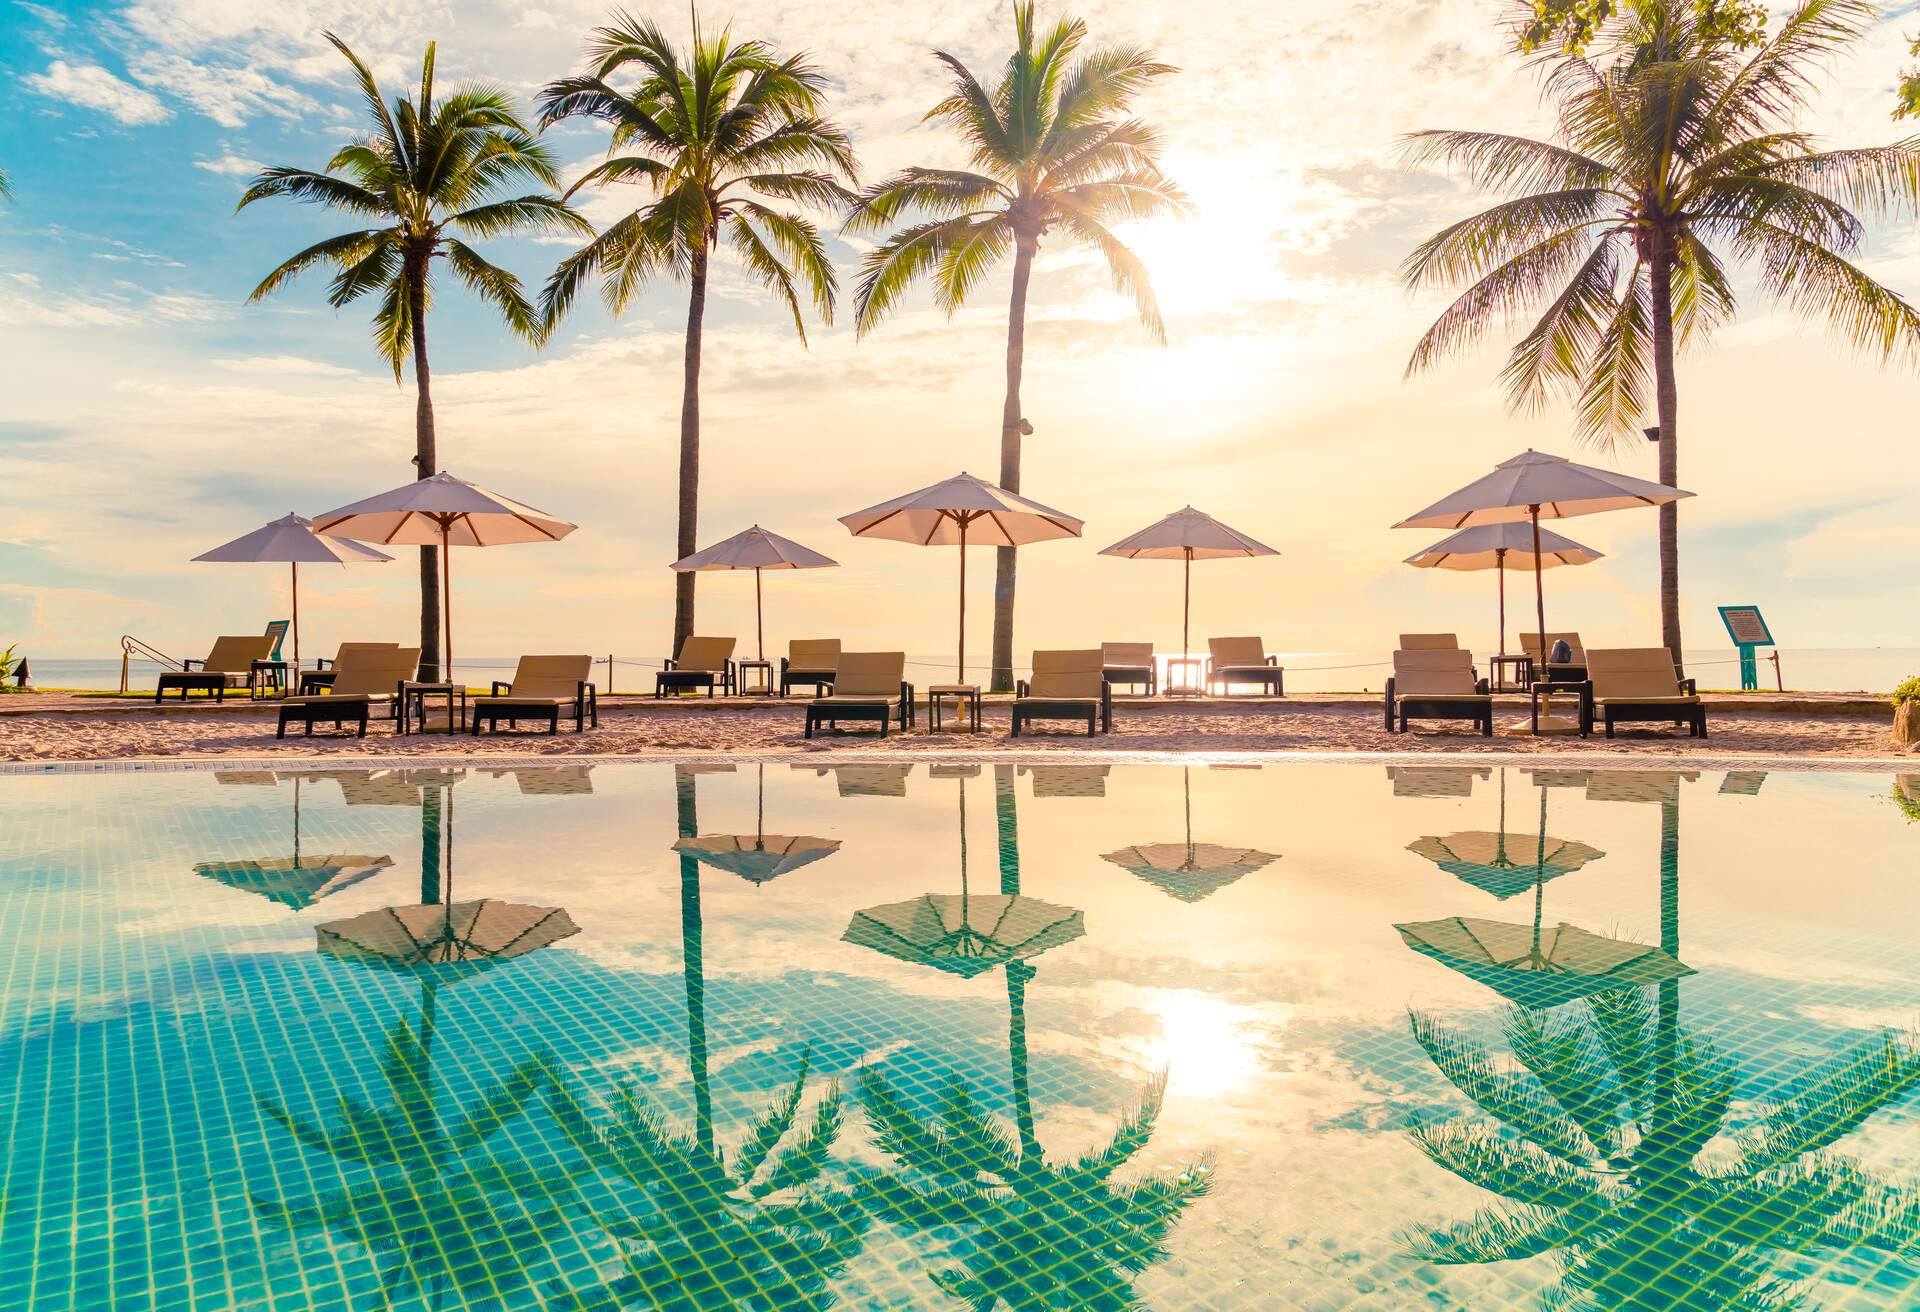 A swimming pool reflects the poolside umbrellas, palm trees, and the scorching sun.